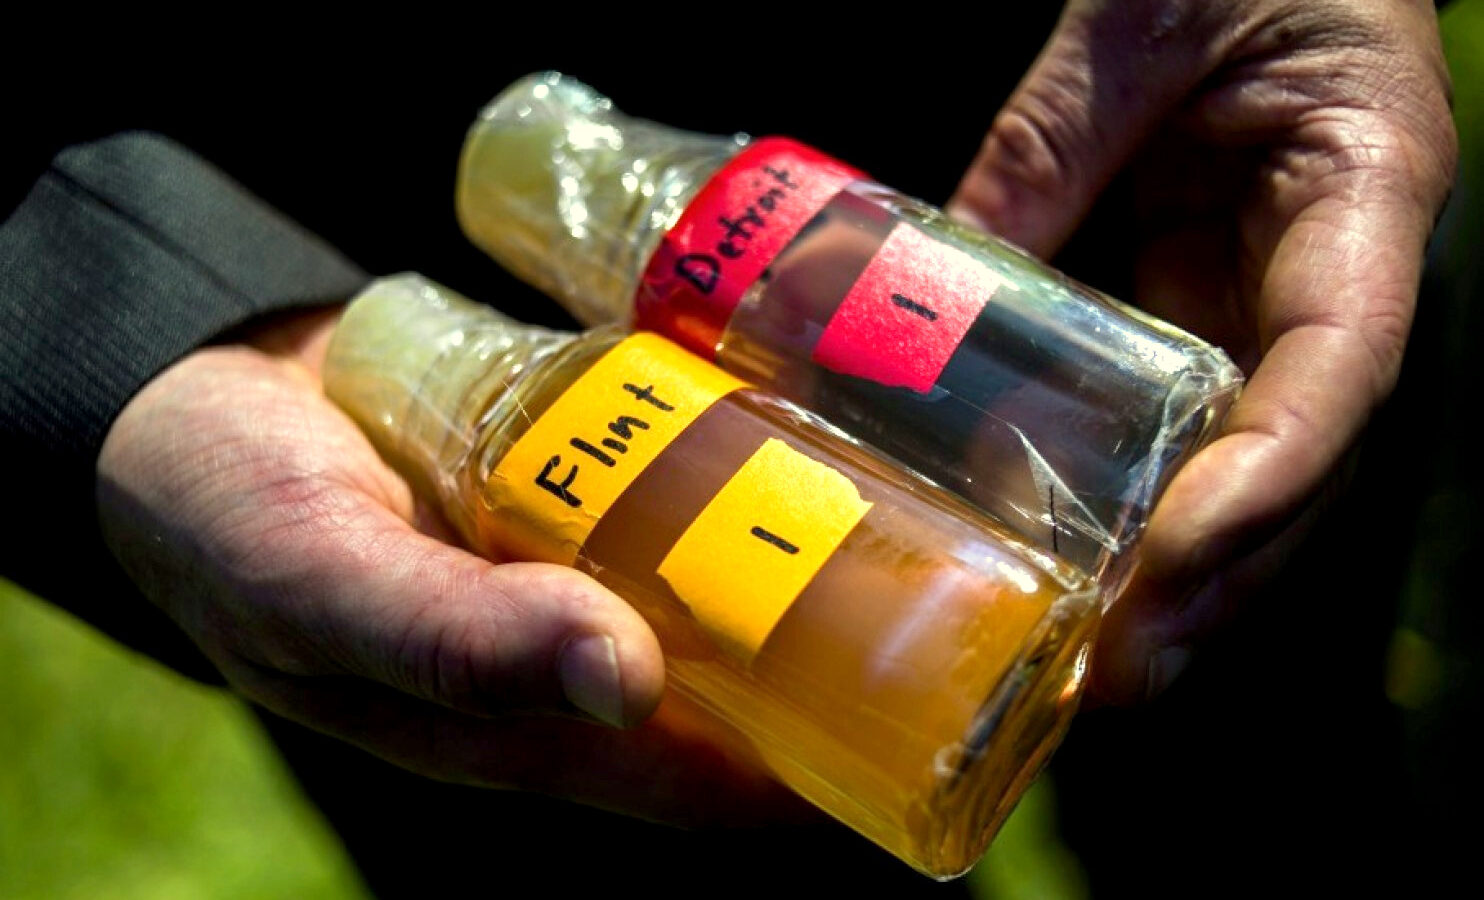 Virginia Tech professor Marc Edwards shows the difference in water quality between Detroit and Flint after testing, giving evidence after more than 270 samples were sent in from Flint that show high levels of lead during a news conference on Tuesday, Sept. 15, 2015 outside of City Hall in downtown Flint, Mich. (Jake May/The Flint Journal via AP)